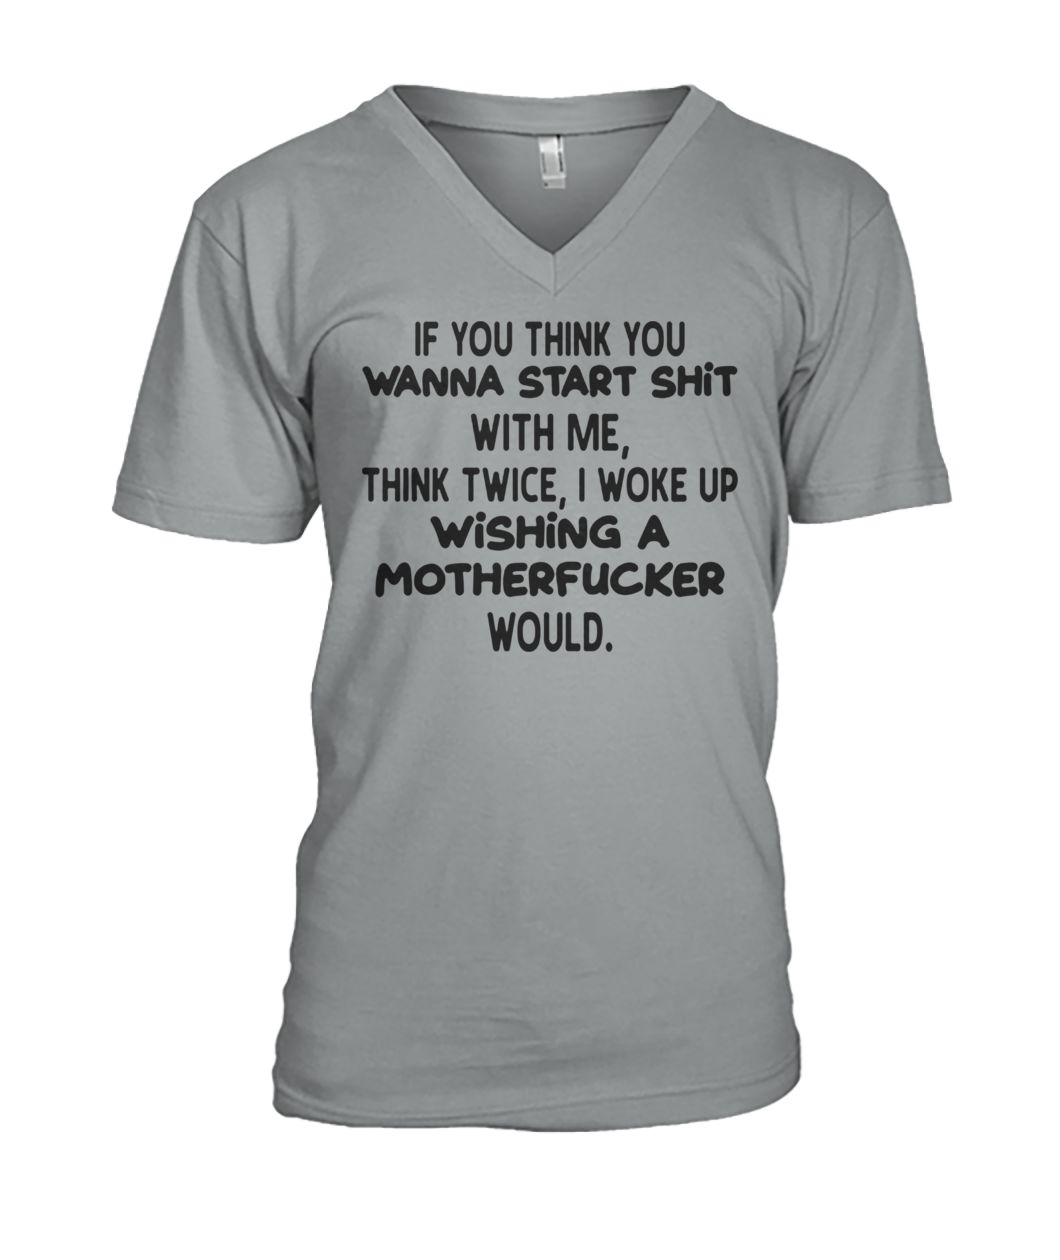 If you think you wanna start shit with me think twice I woke up wishing a motherfucker would mens v-neck